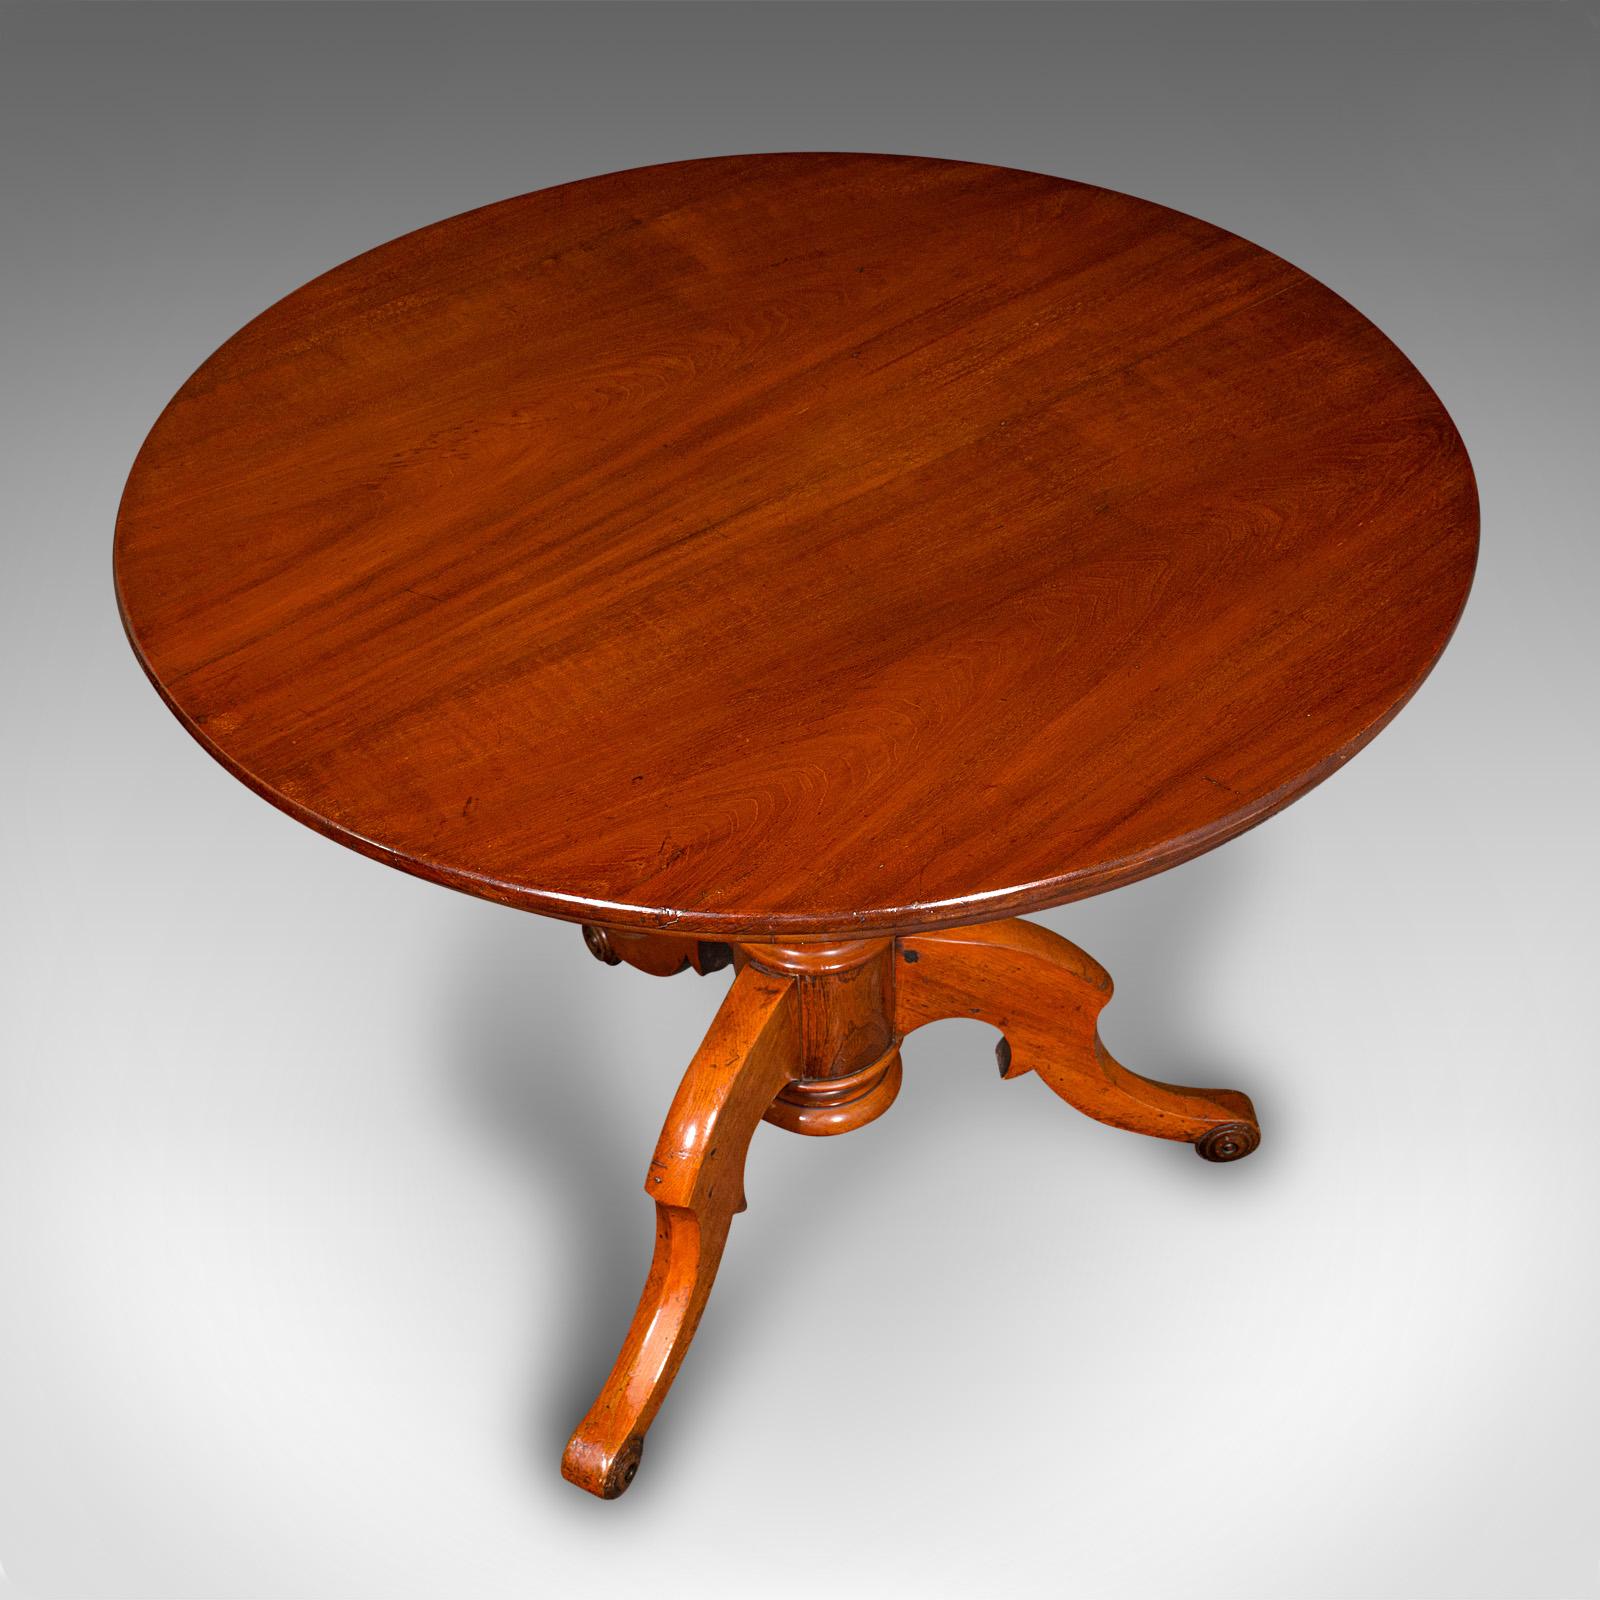 19th Century Antique Display Table, English, Walnut, Intimate Dining, 2-4 Seat, Victorian For Sale